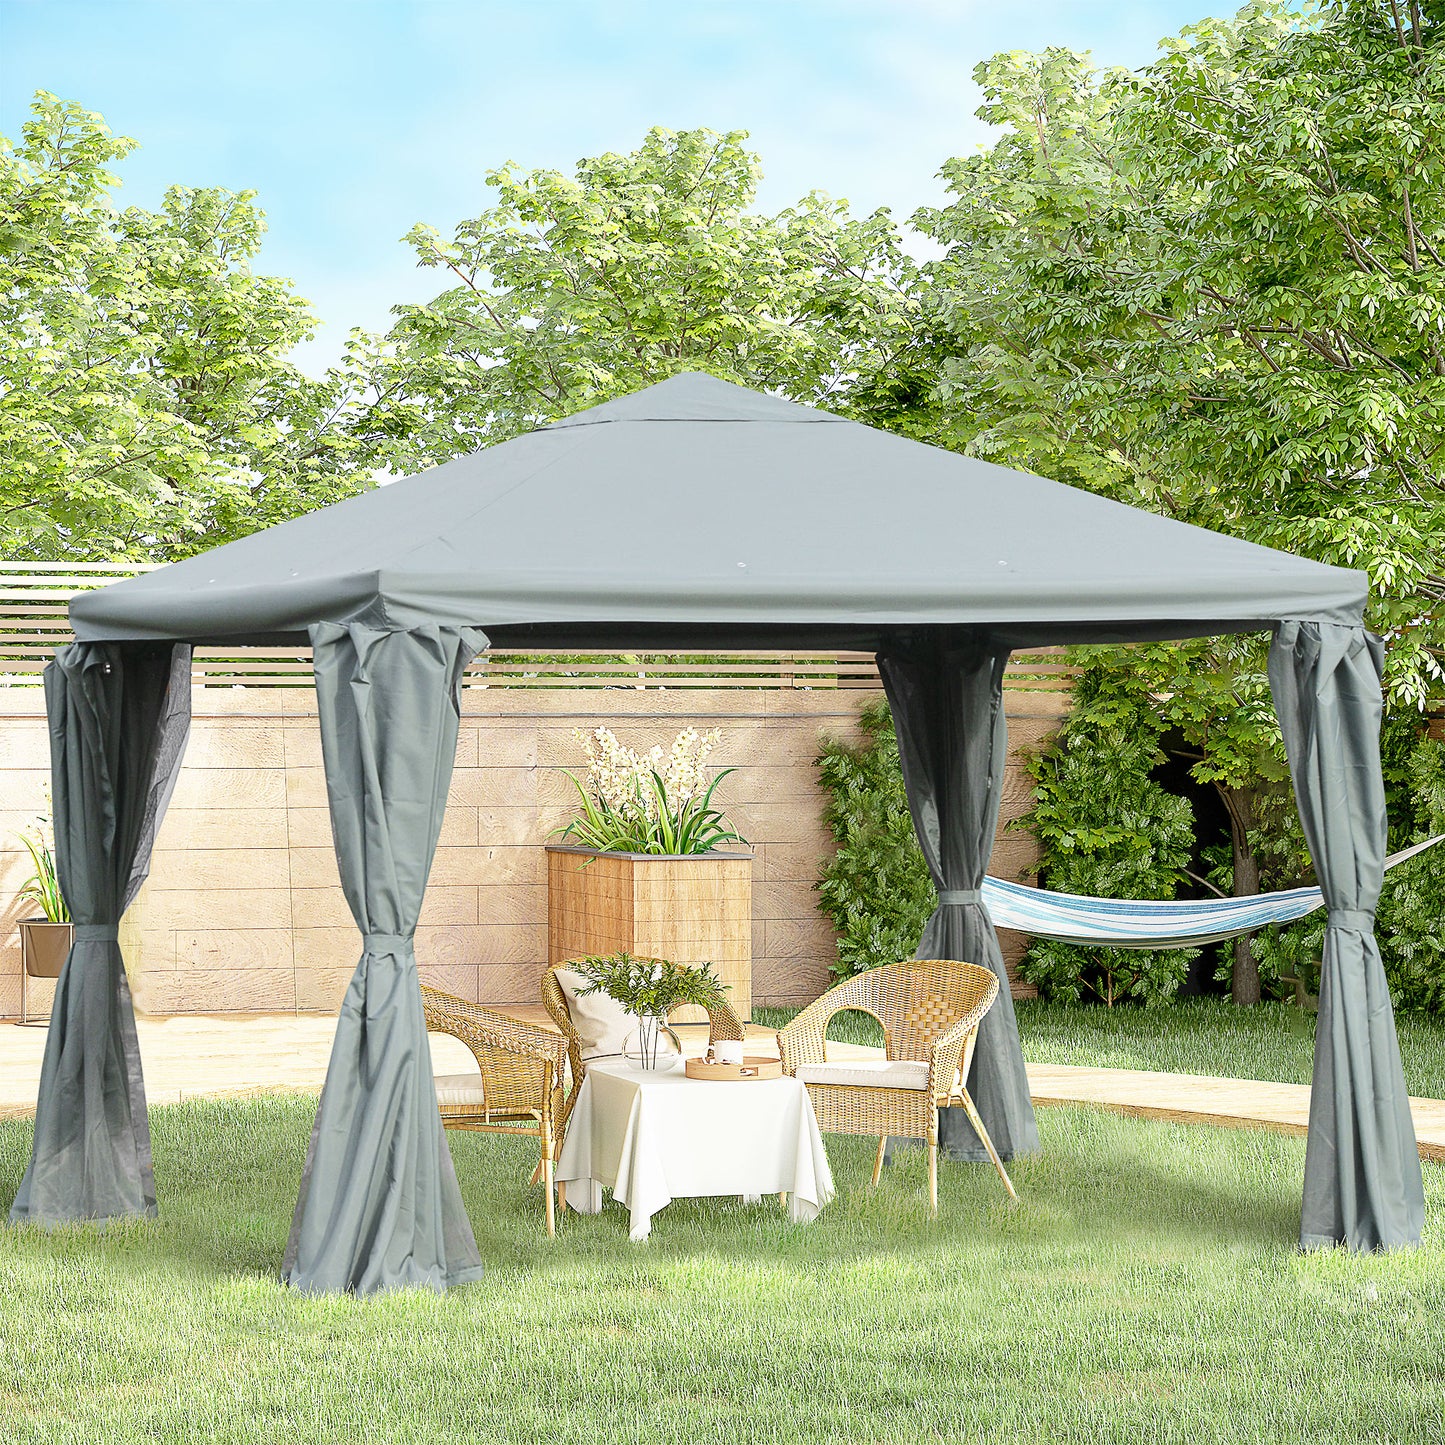 Outsunny 3(m) Garden Gazebo Canopy Party Tent Garden Pavilion Patio Shelter Aluminum Frame with Curtains, Netting Sidewalls, Grey